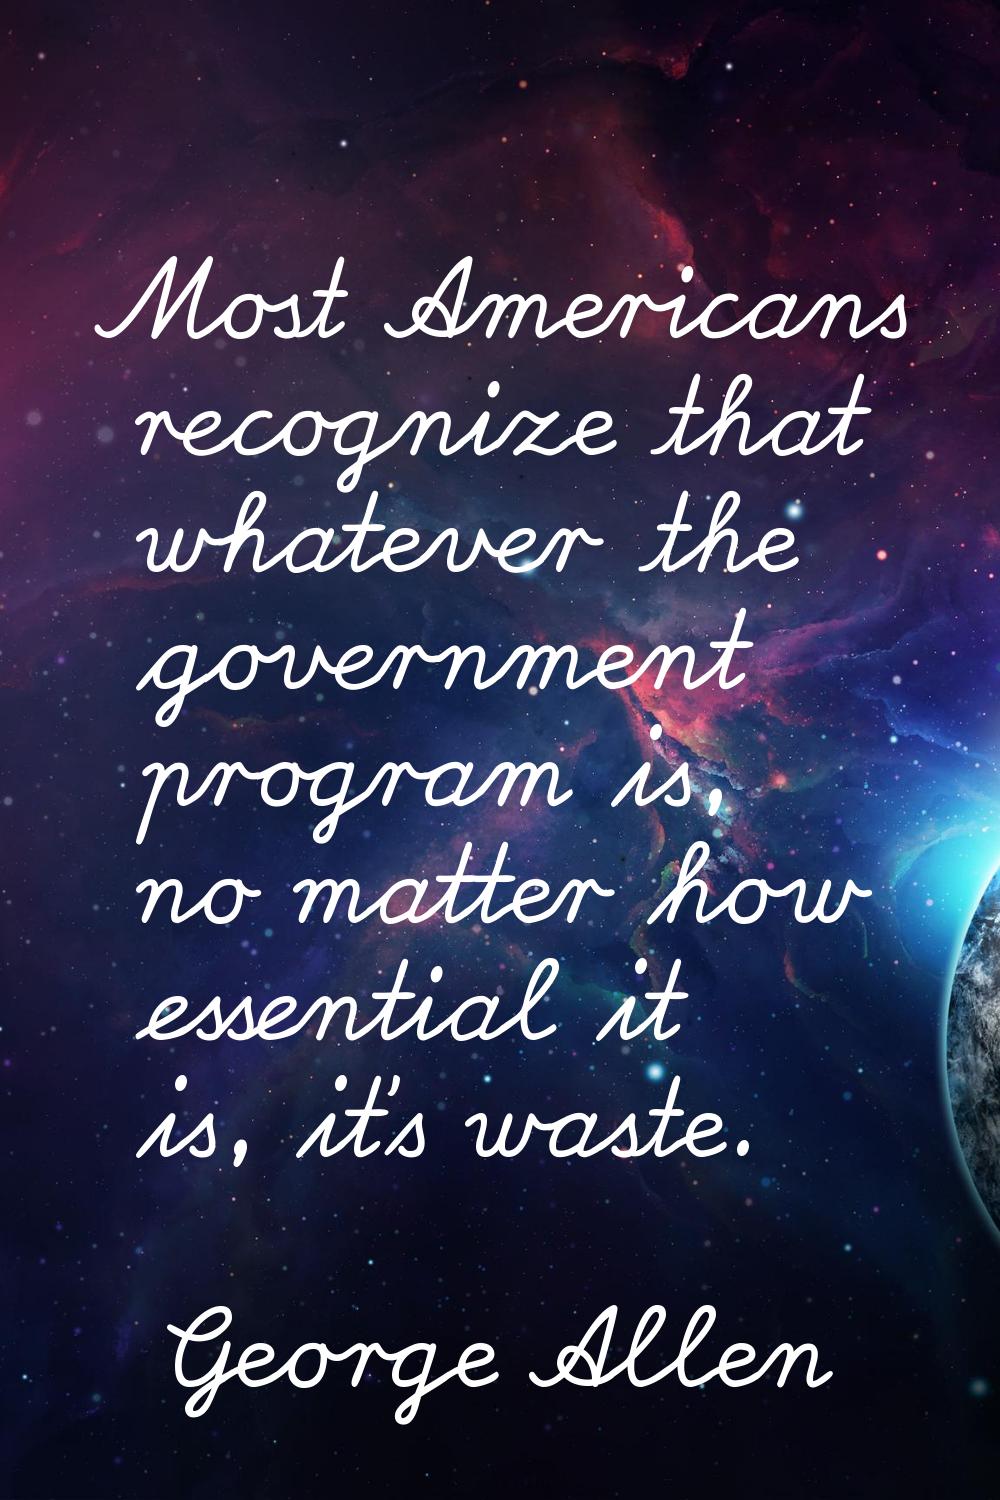 Most Americans recognize that whatever the government program is, no matter how essential it is, it